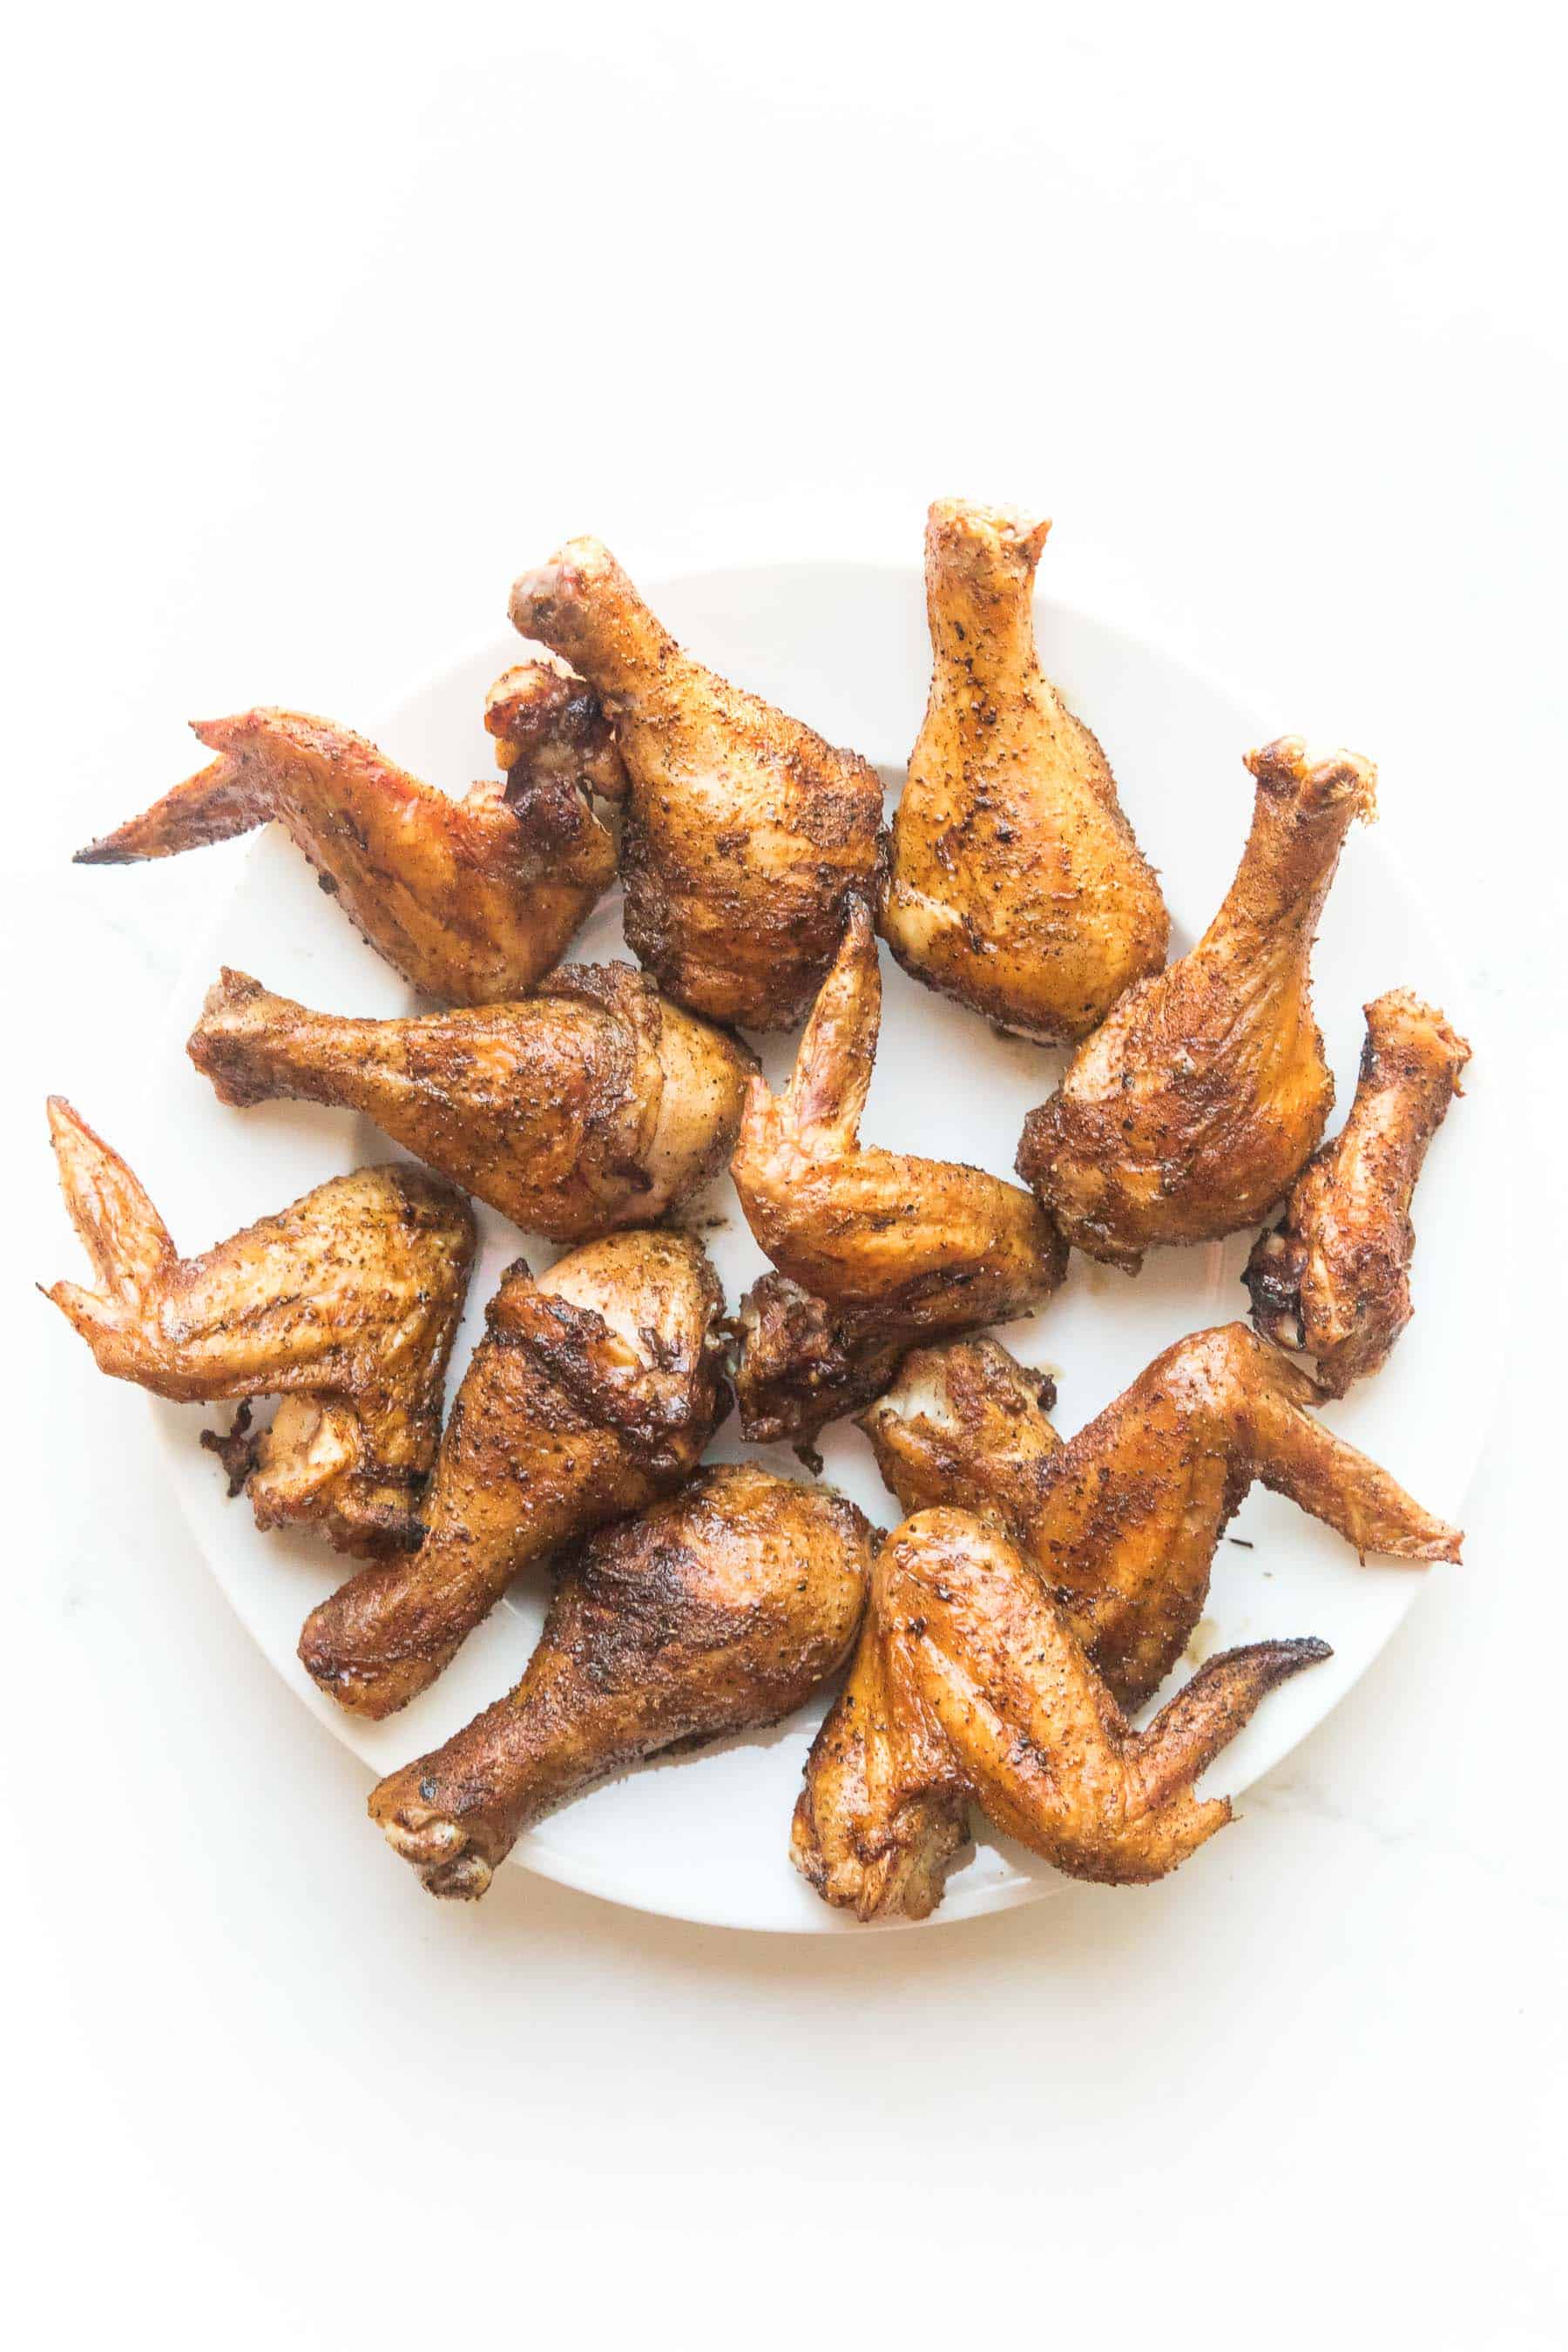 crispy roasted drumsticks + wings on a white plate and background